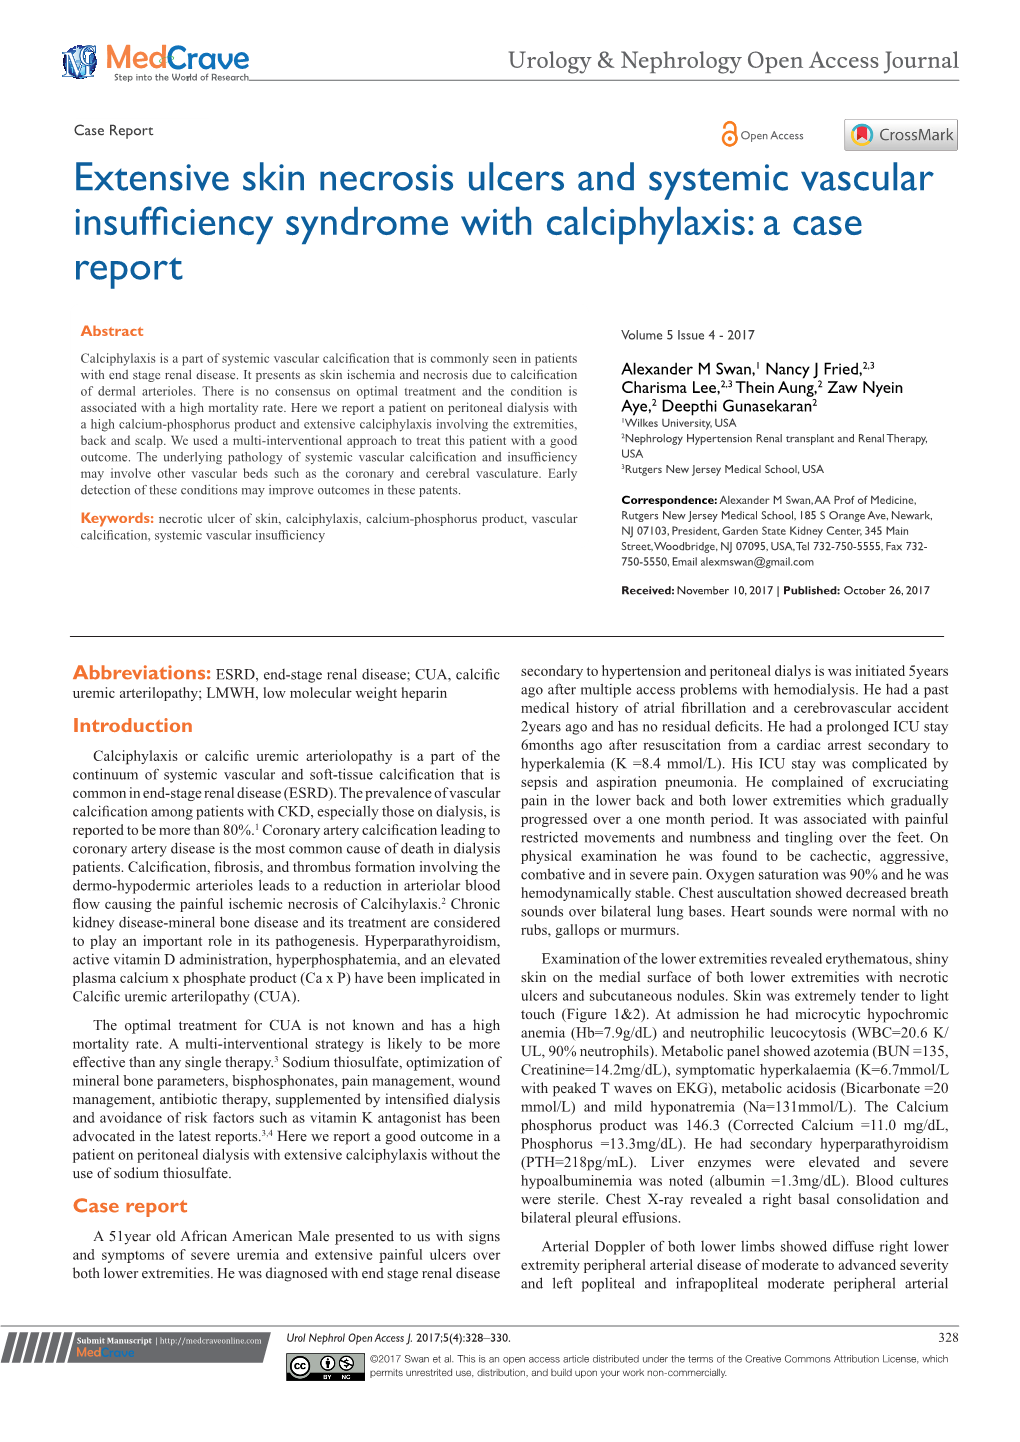 Extensive Skin Necrosis Ulcers and Systemic Vascular Insufficiency Syndrome with Calciphylaxis: a Case Report